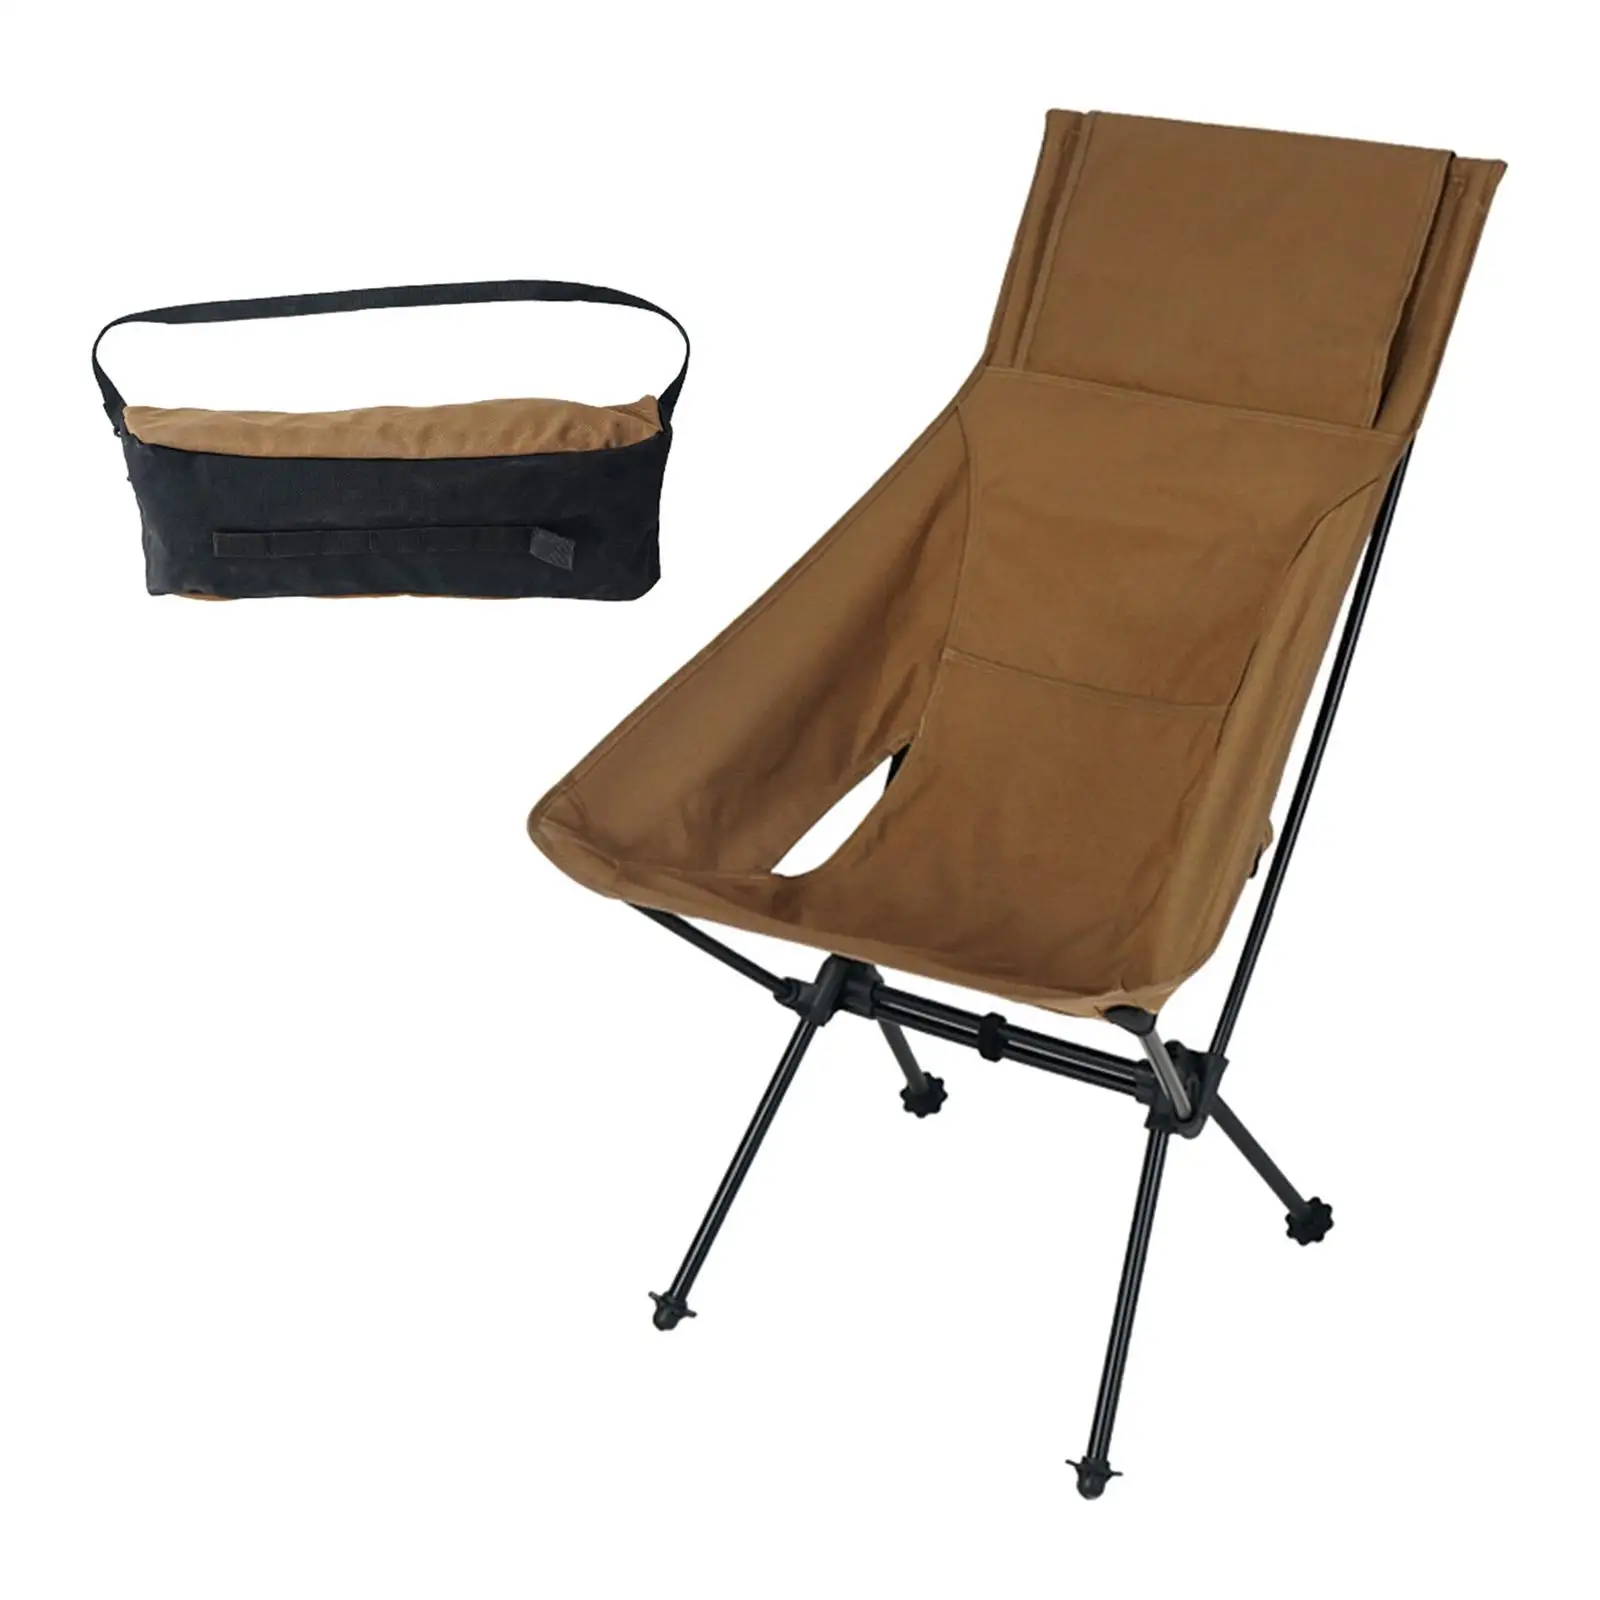 Ultralight Folding Portable Camping Seat for Outdoor Lawn BBQ